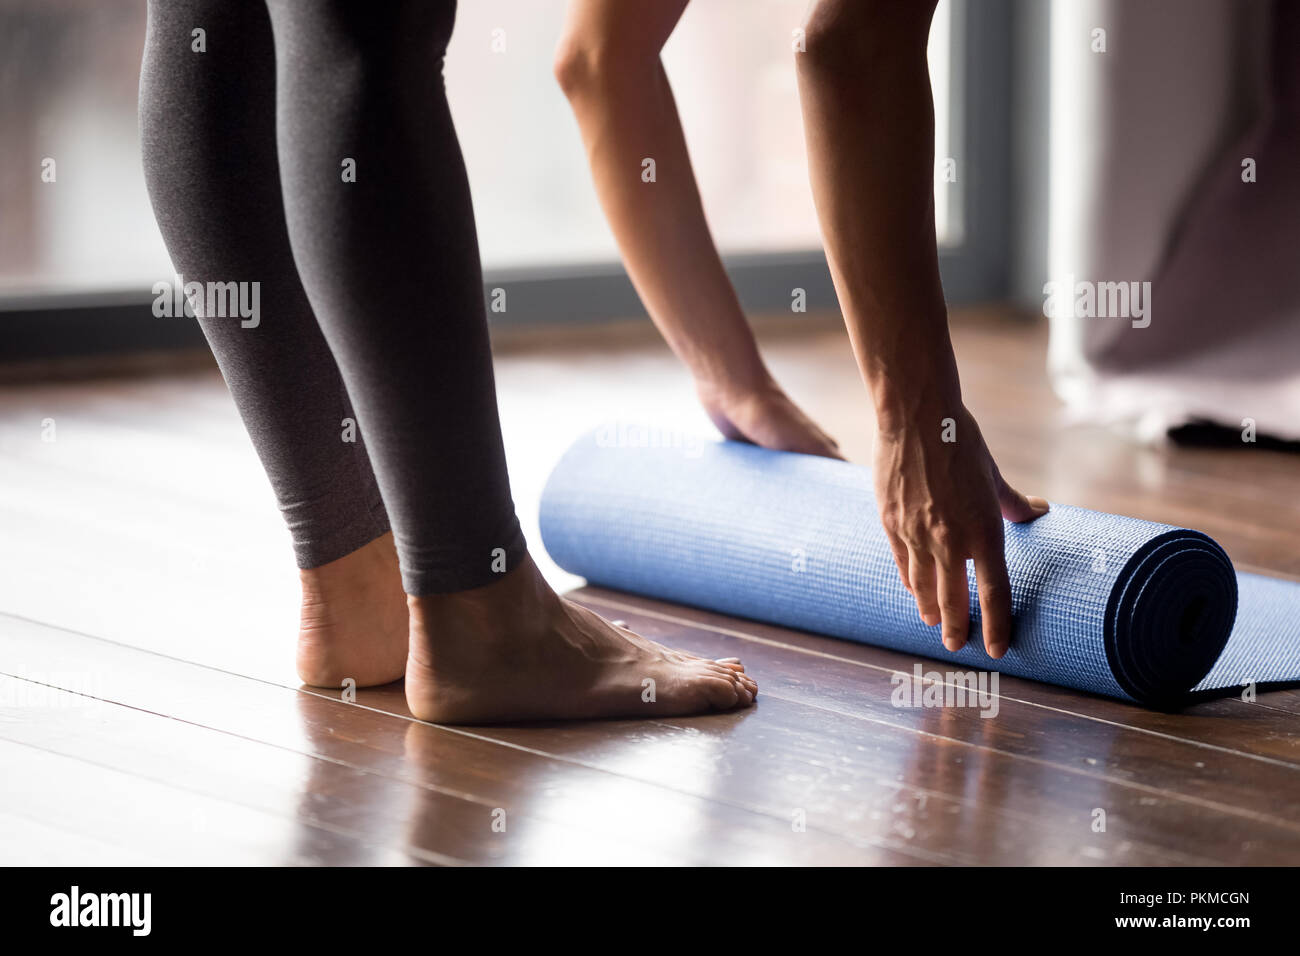 Girl rolling yoga mat for meditation or fitness at home Stock Photo